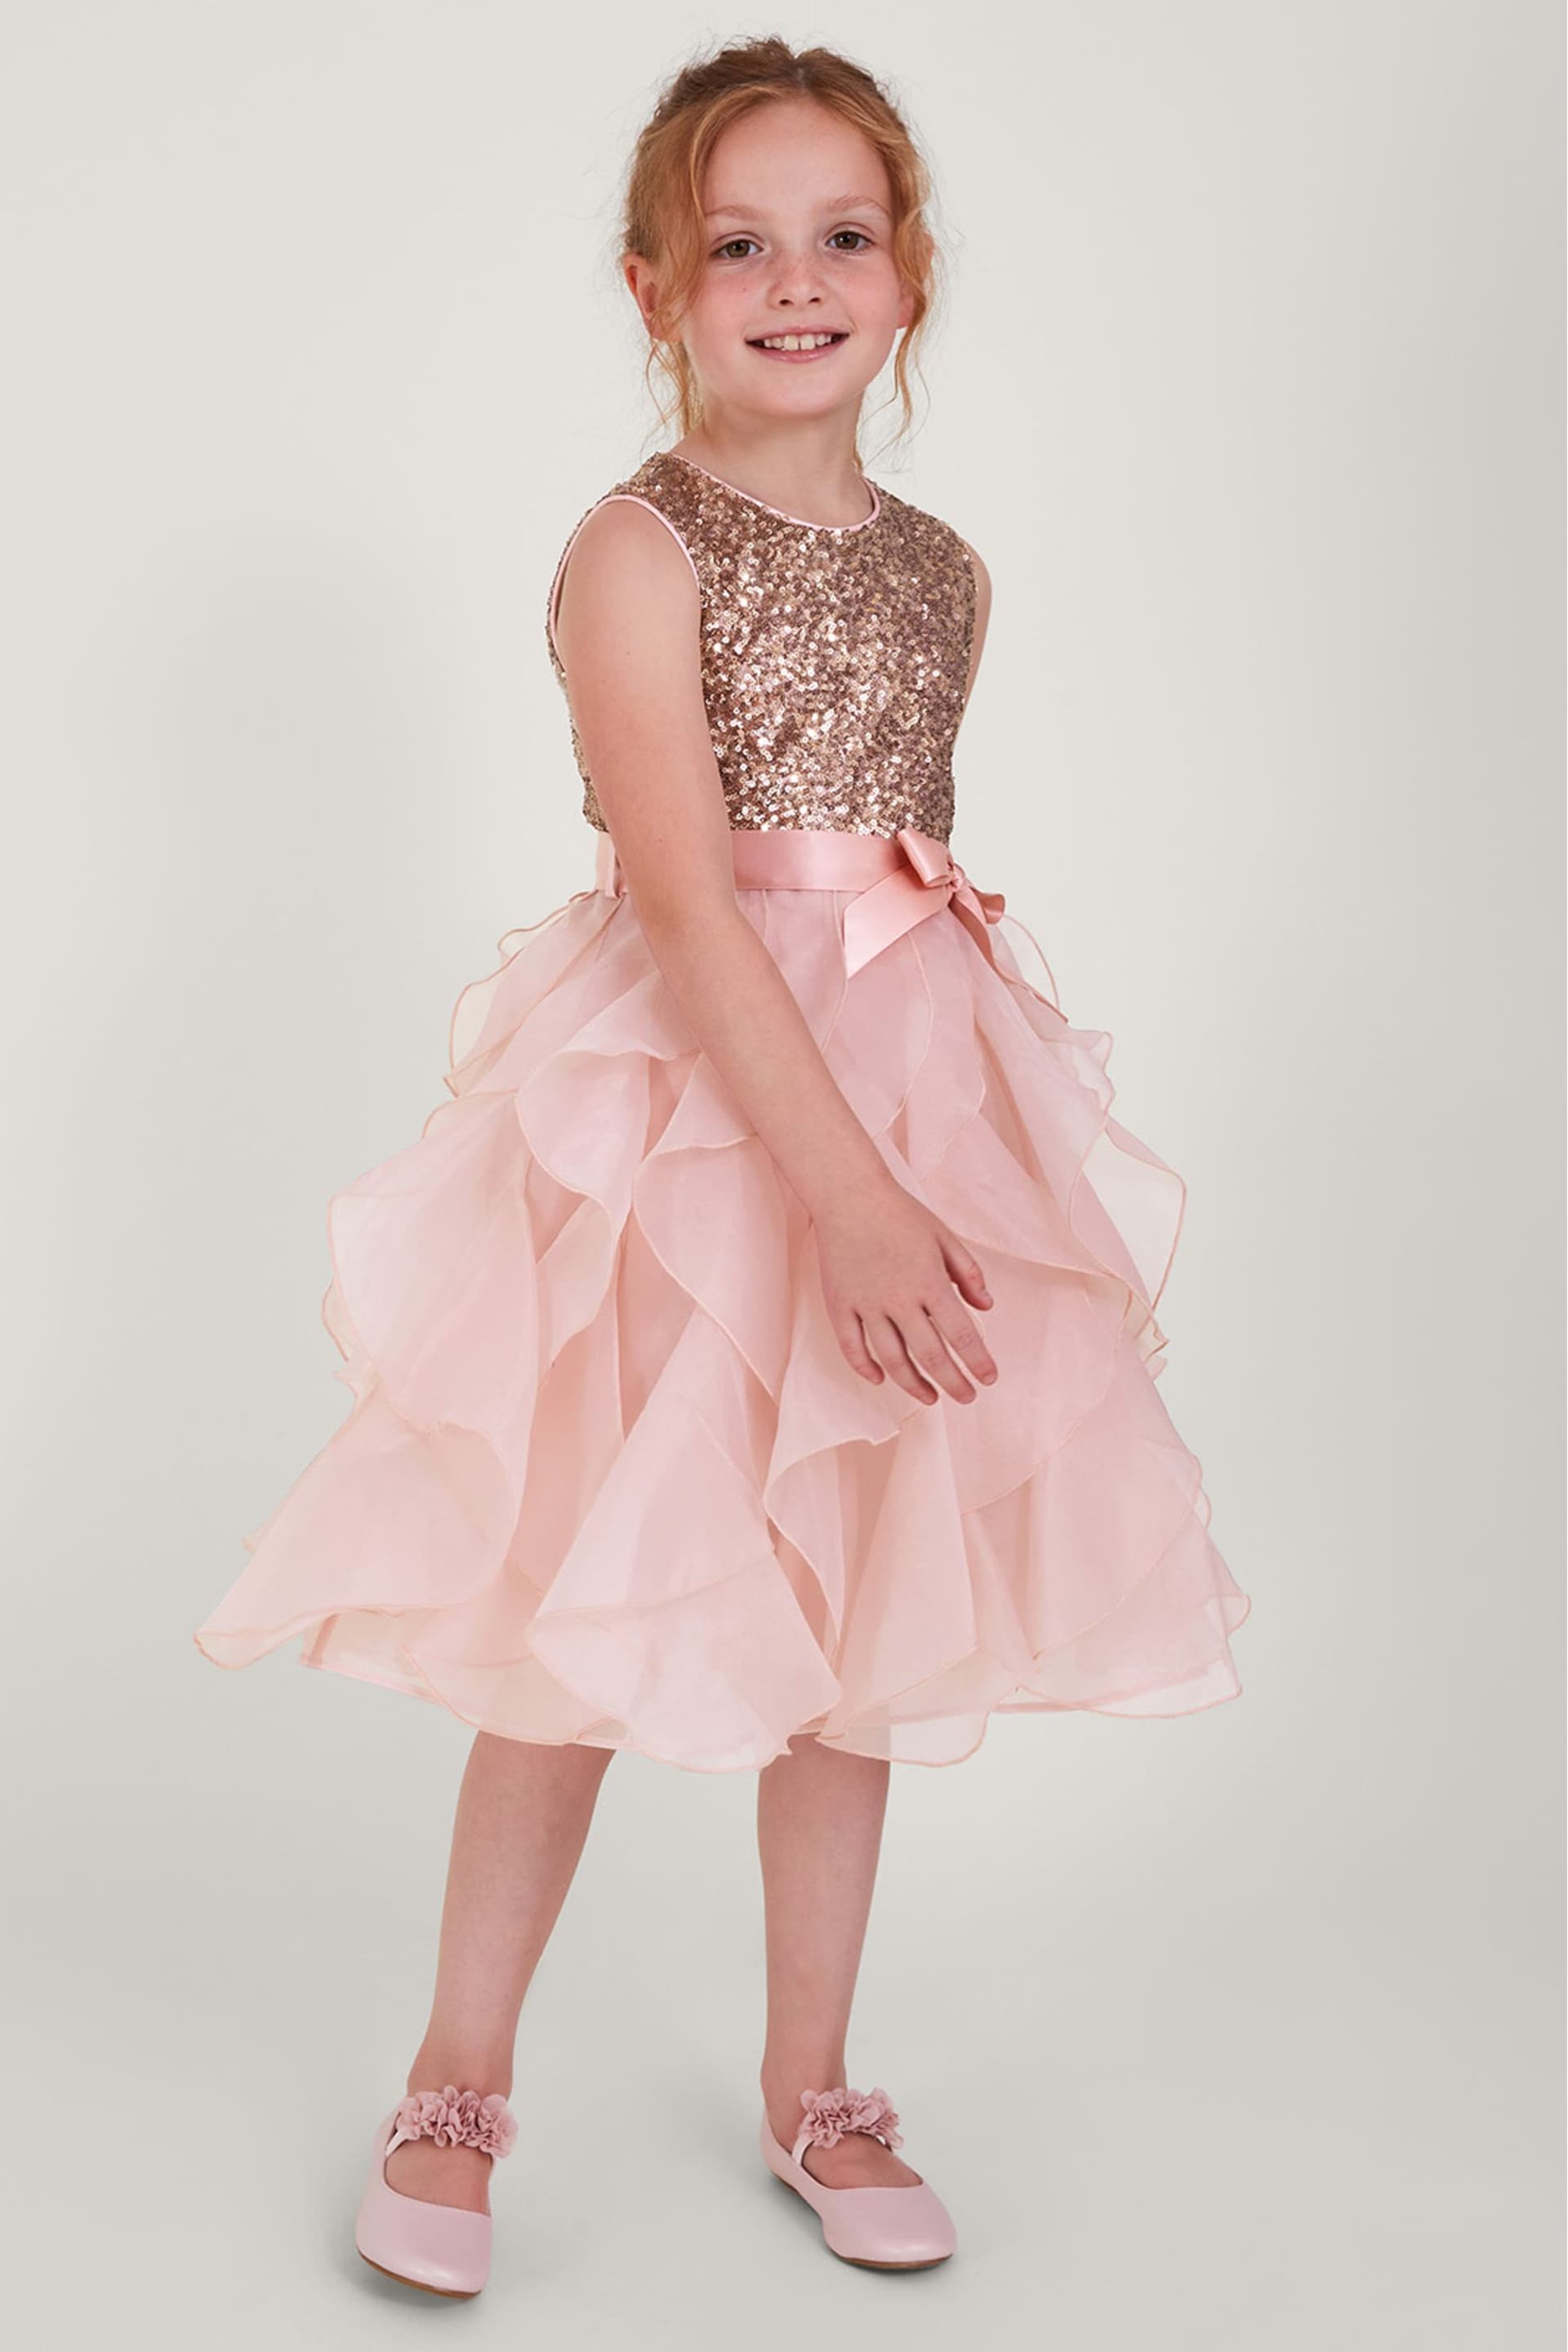 Monsoon Pink Sequin Ruffle Cancan Dress - Image 1 of 5